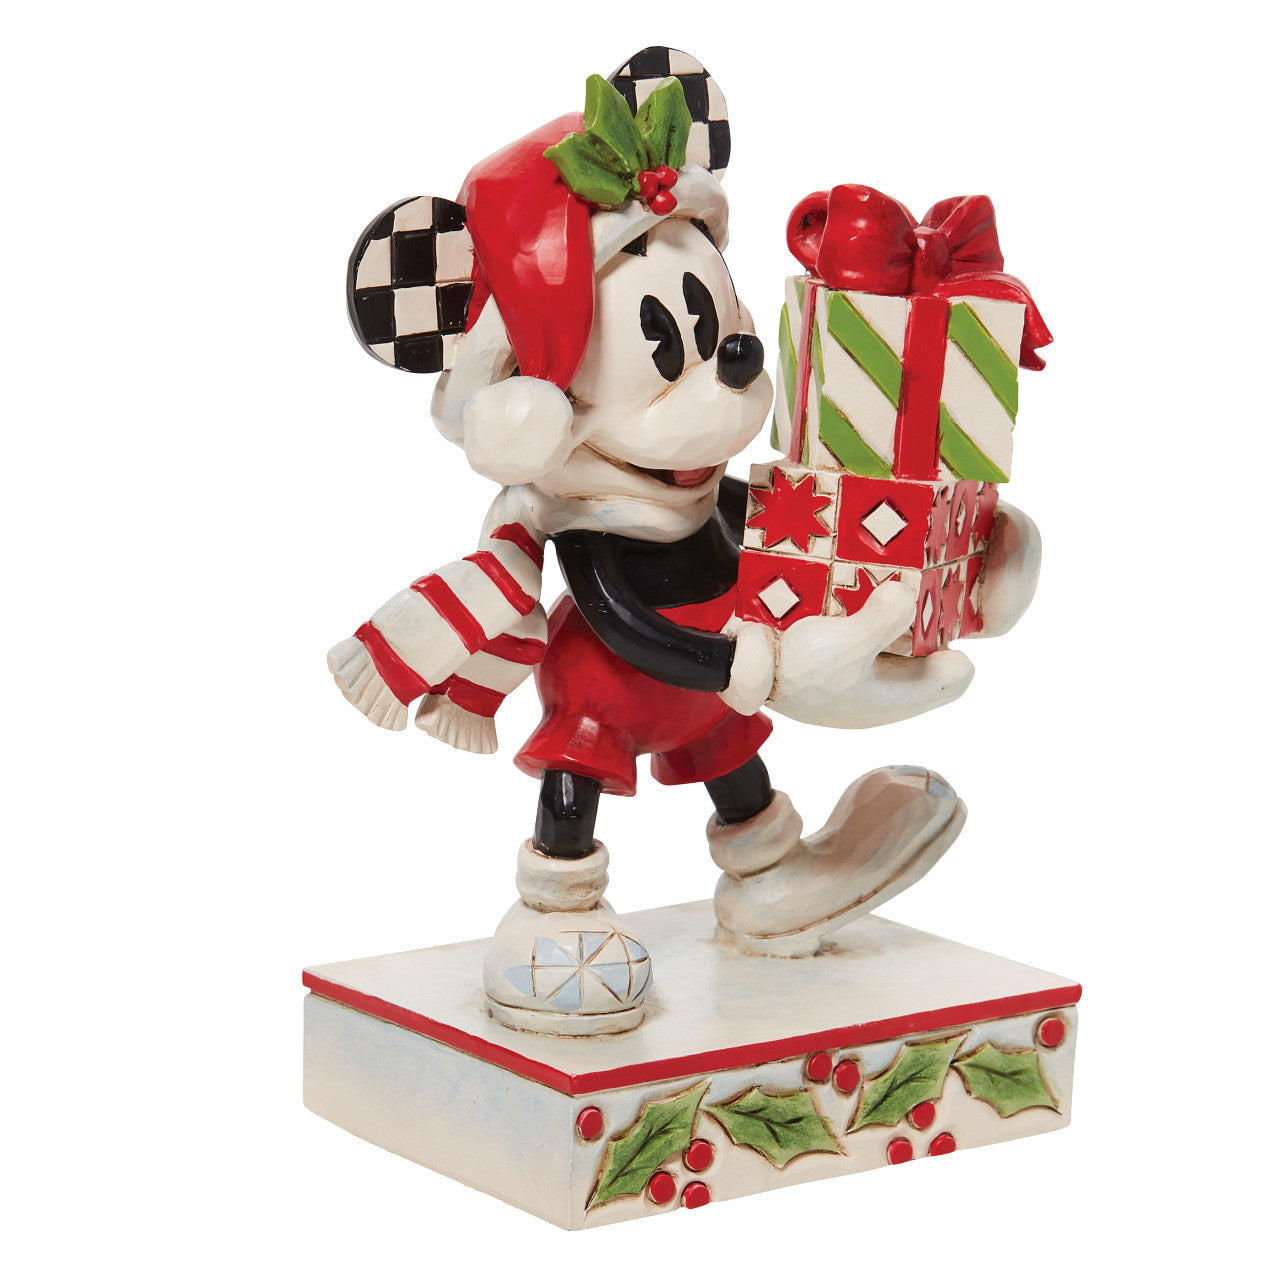 A Season of Giving - Mickey with Stack of Presents